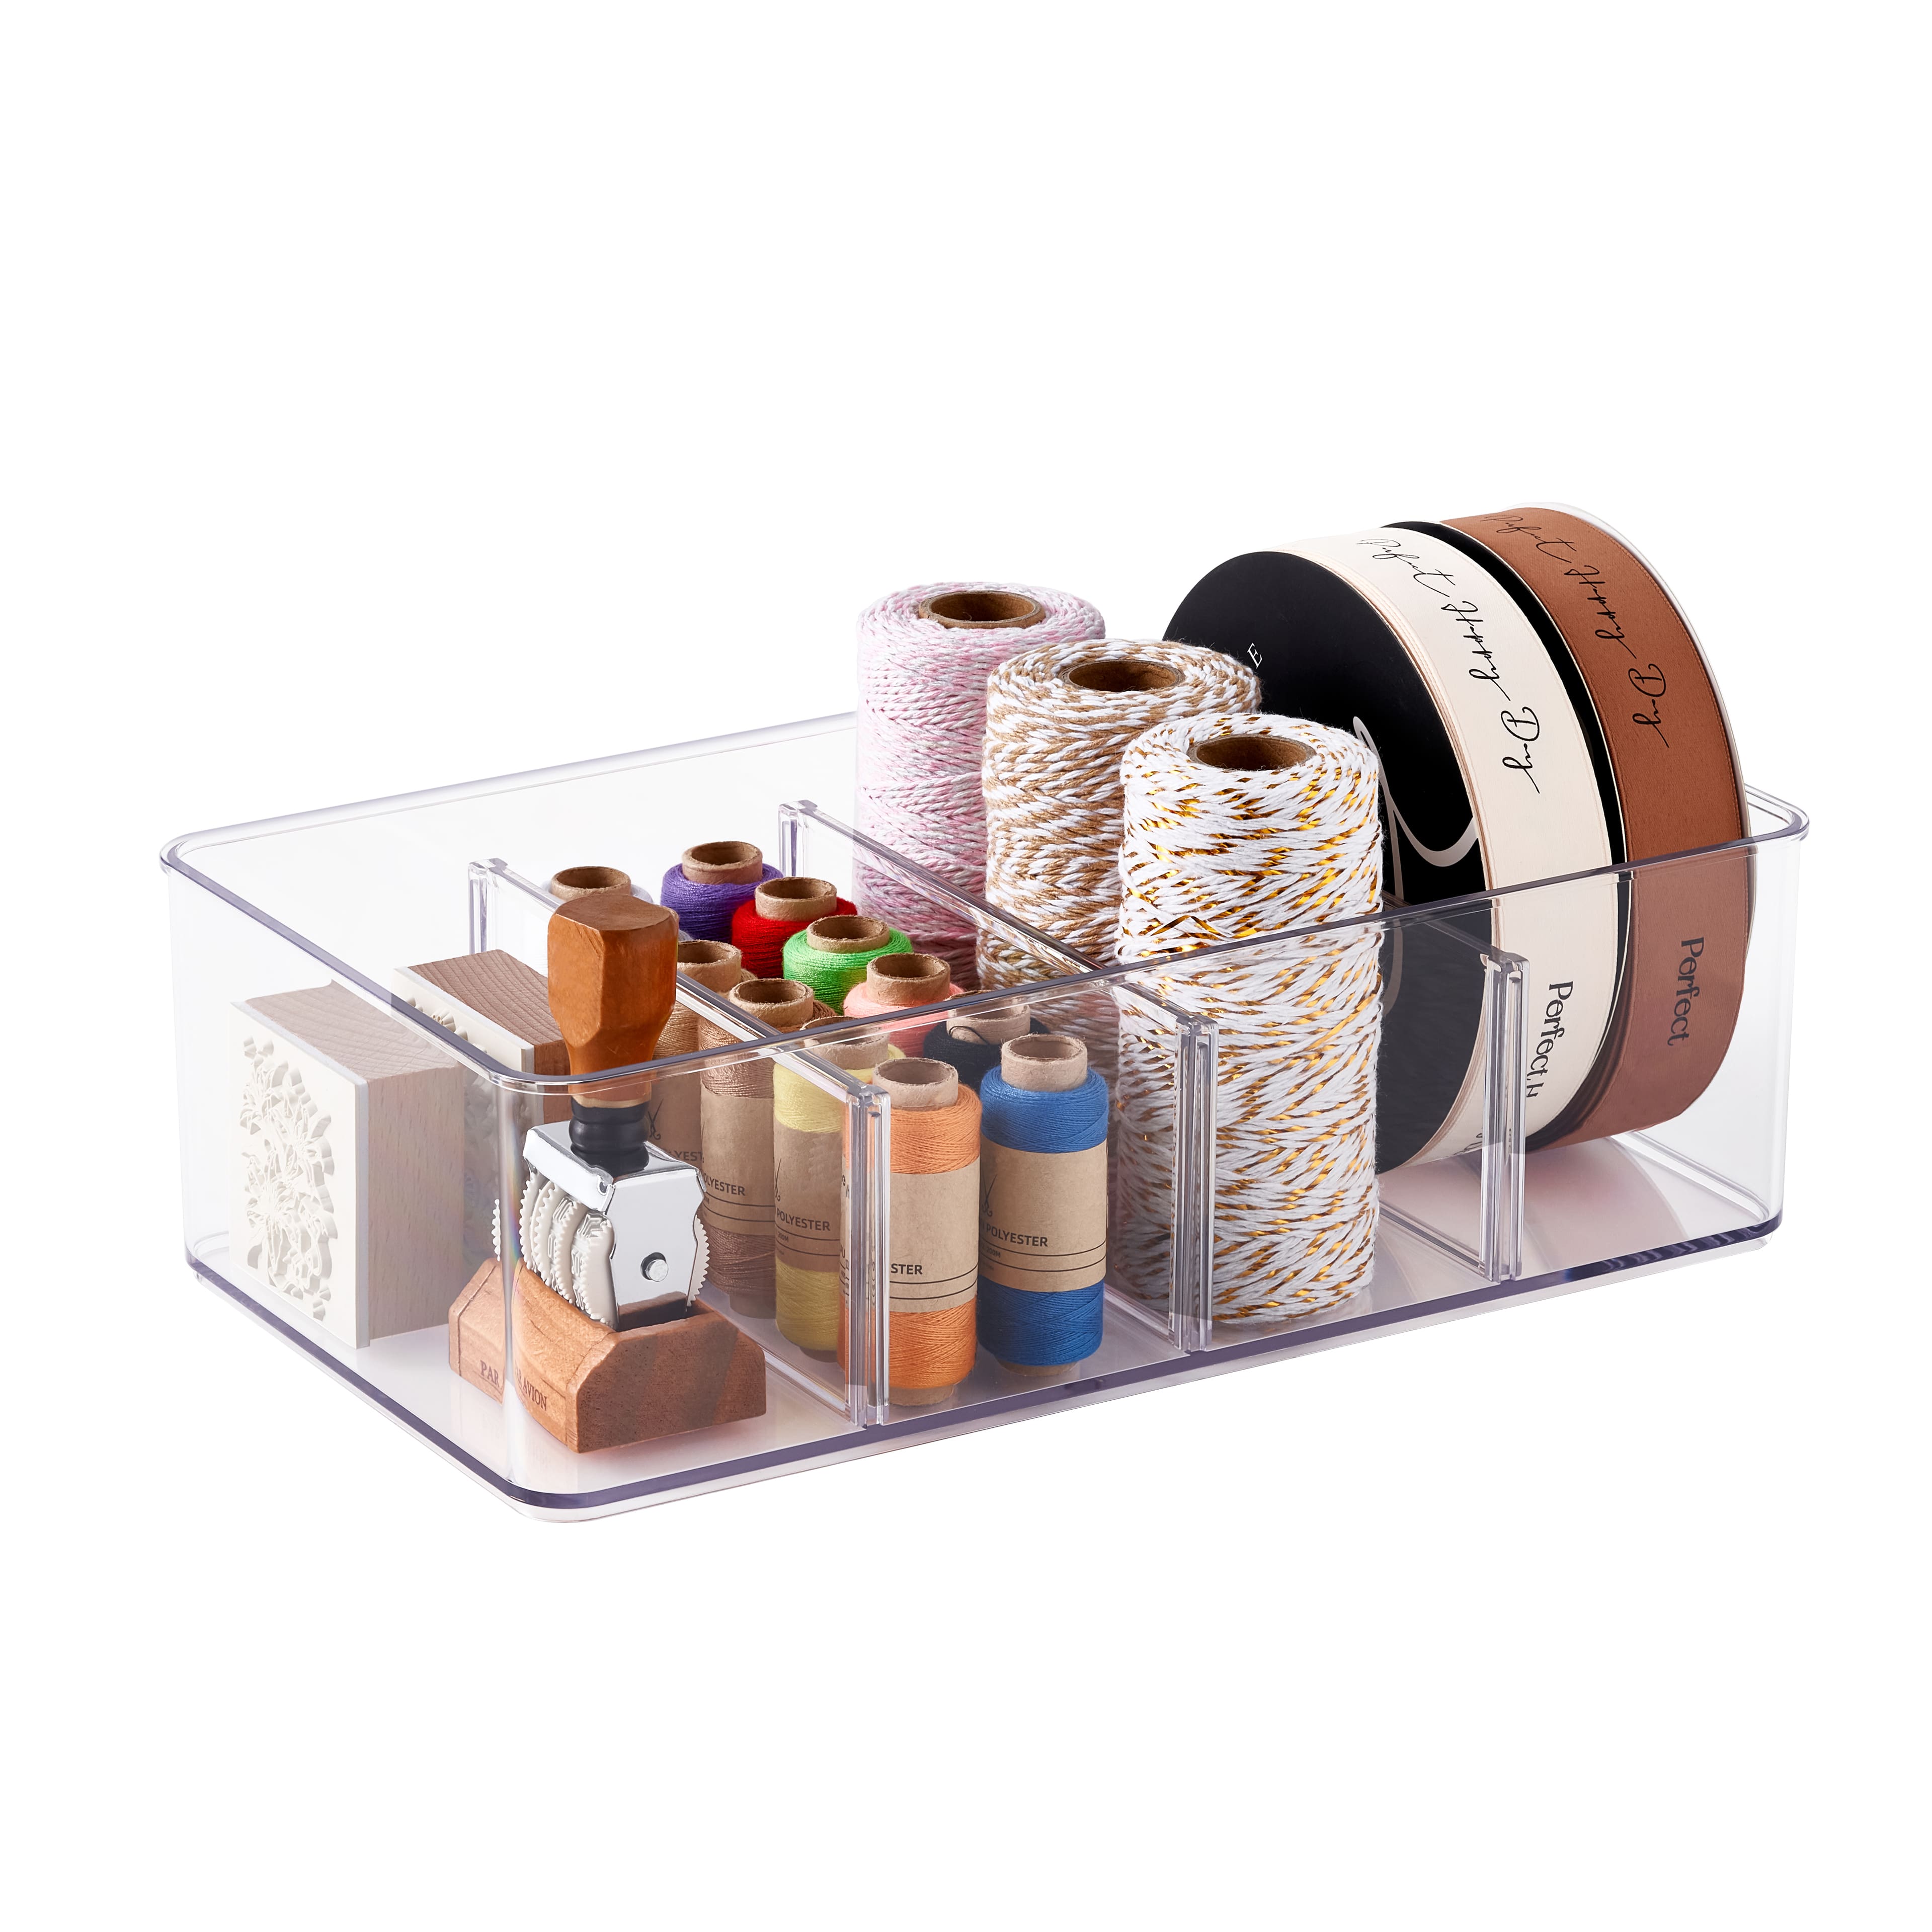 Buy 10L Clear Plastic Storage Box with Removable Dividers Containers Bin  Tubs dd Online